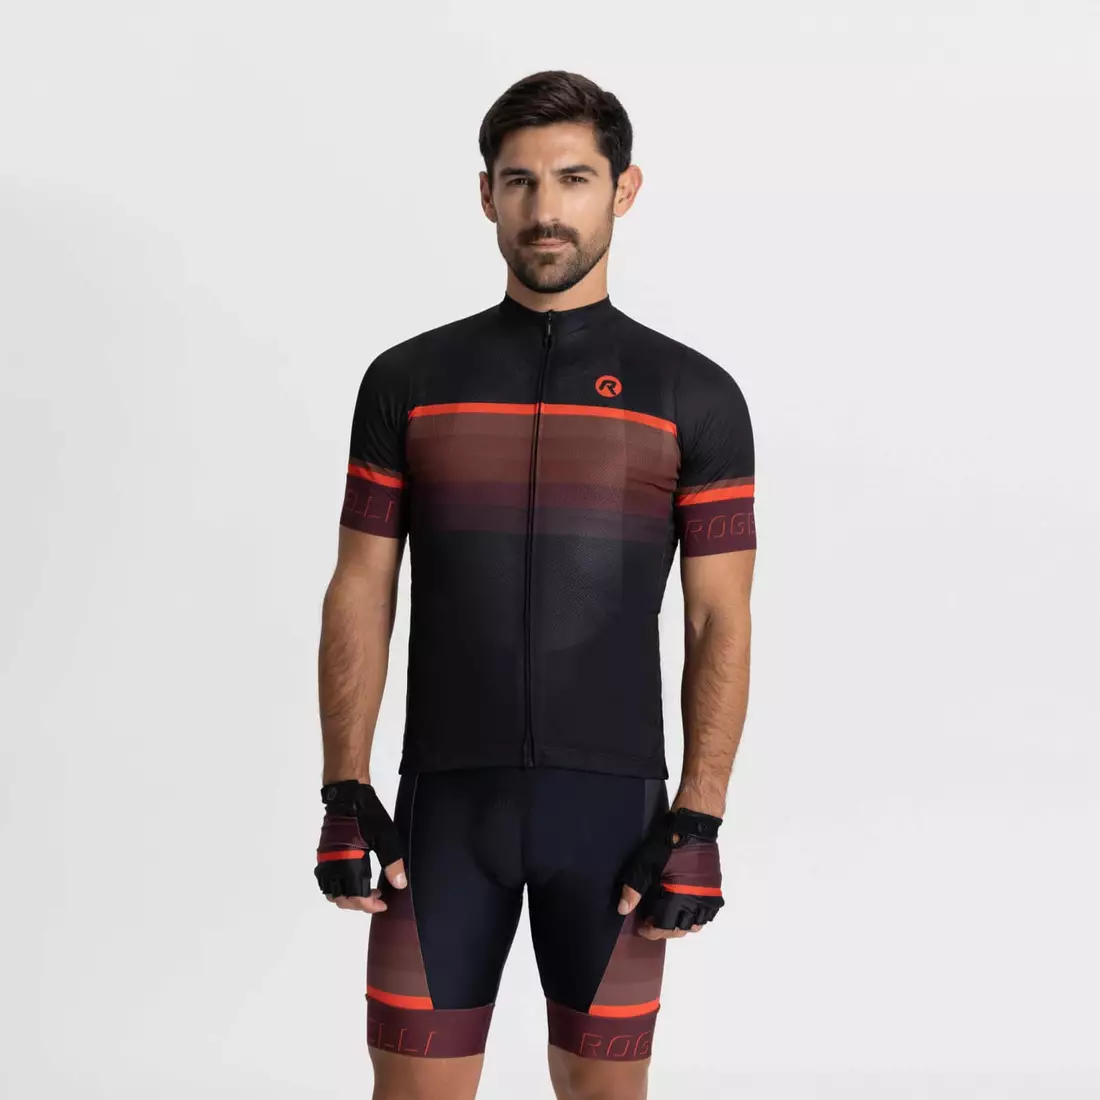 Rogelli HERO II men's cycling jersey, black and red